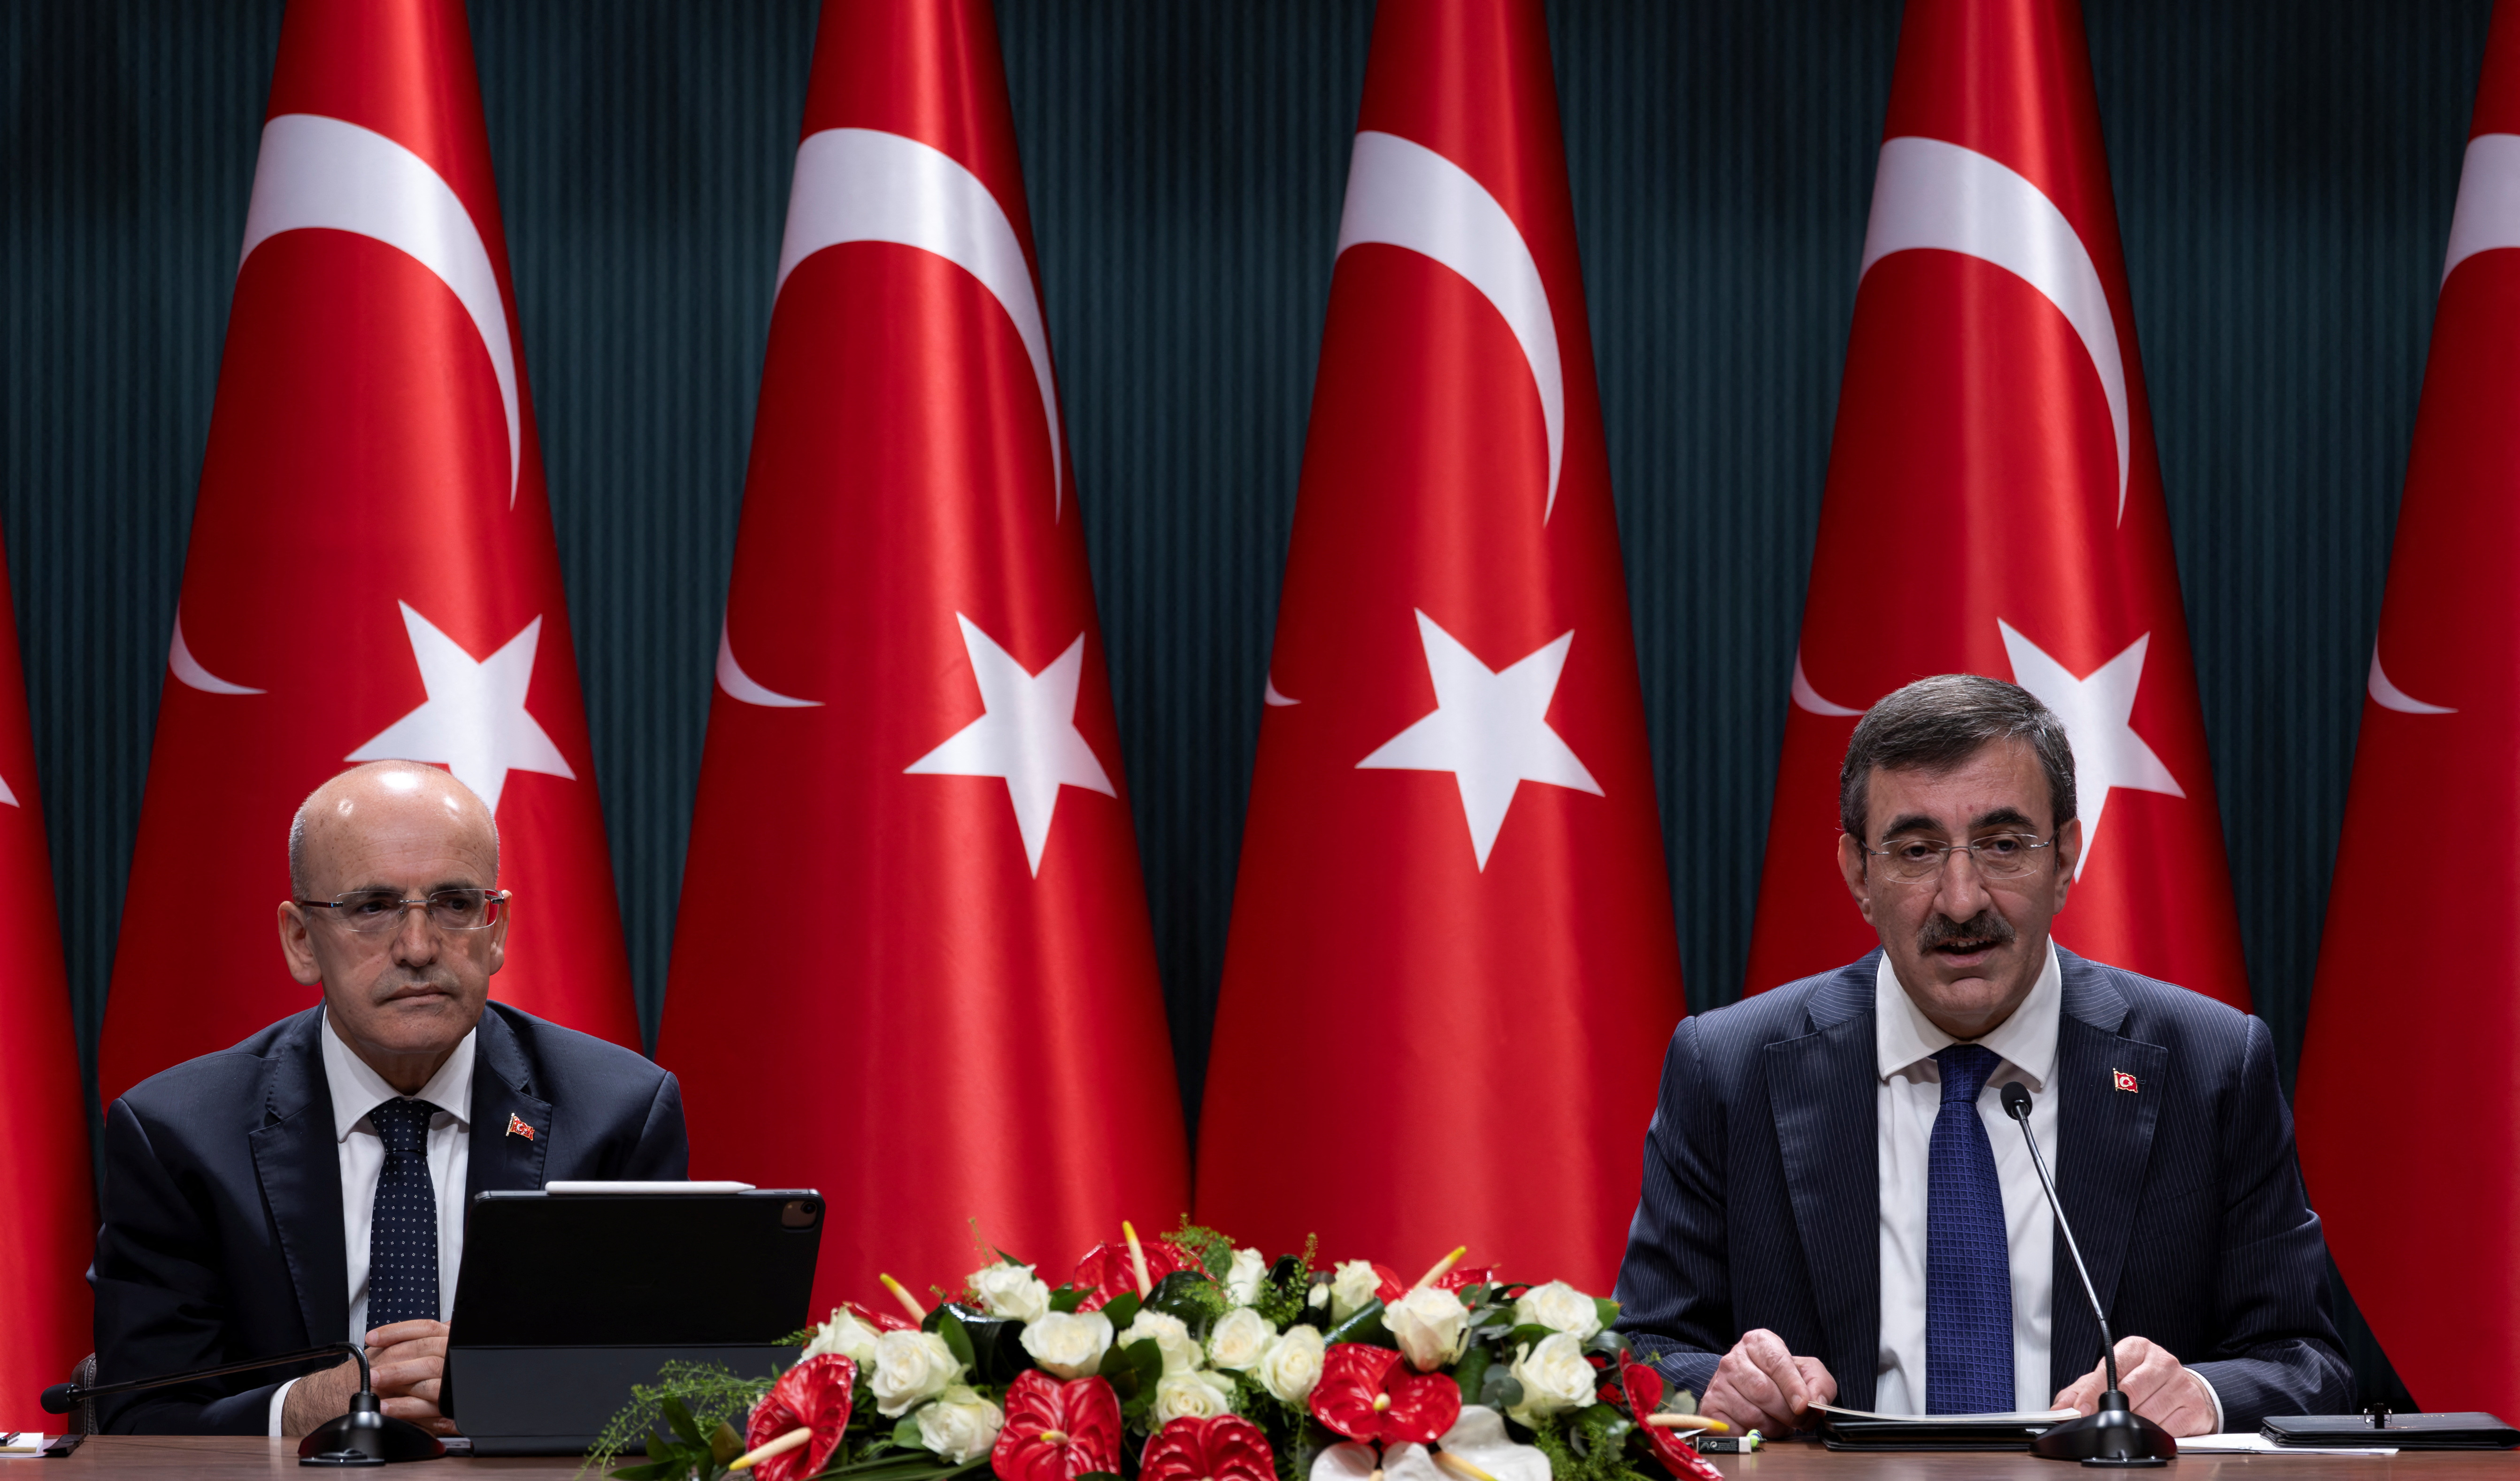 Turkey's Vice President Cevdet Yilmaz and Finance Minister Mehmet Simsek attend a press conference in Ankara